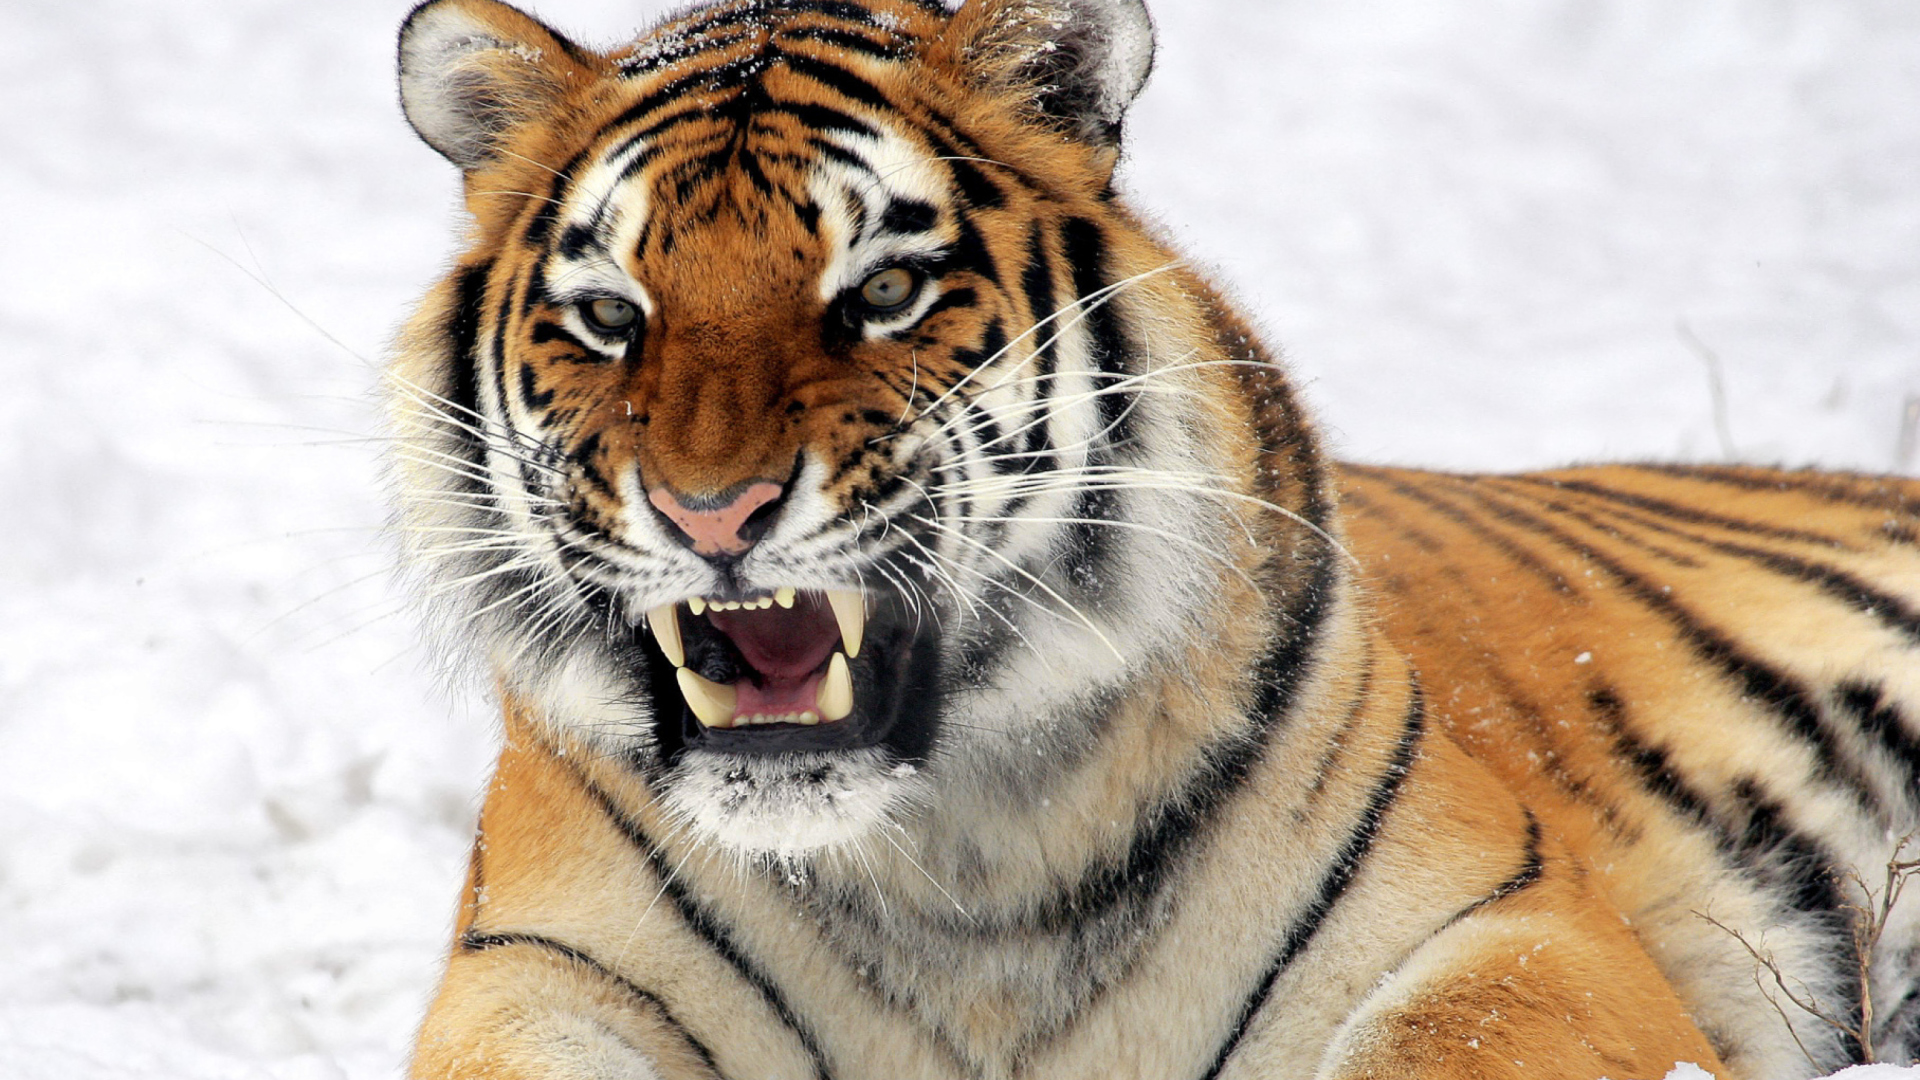 Tiger In The Snow wallpaper 1920x1080